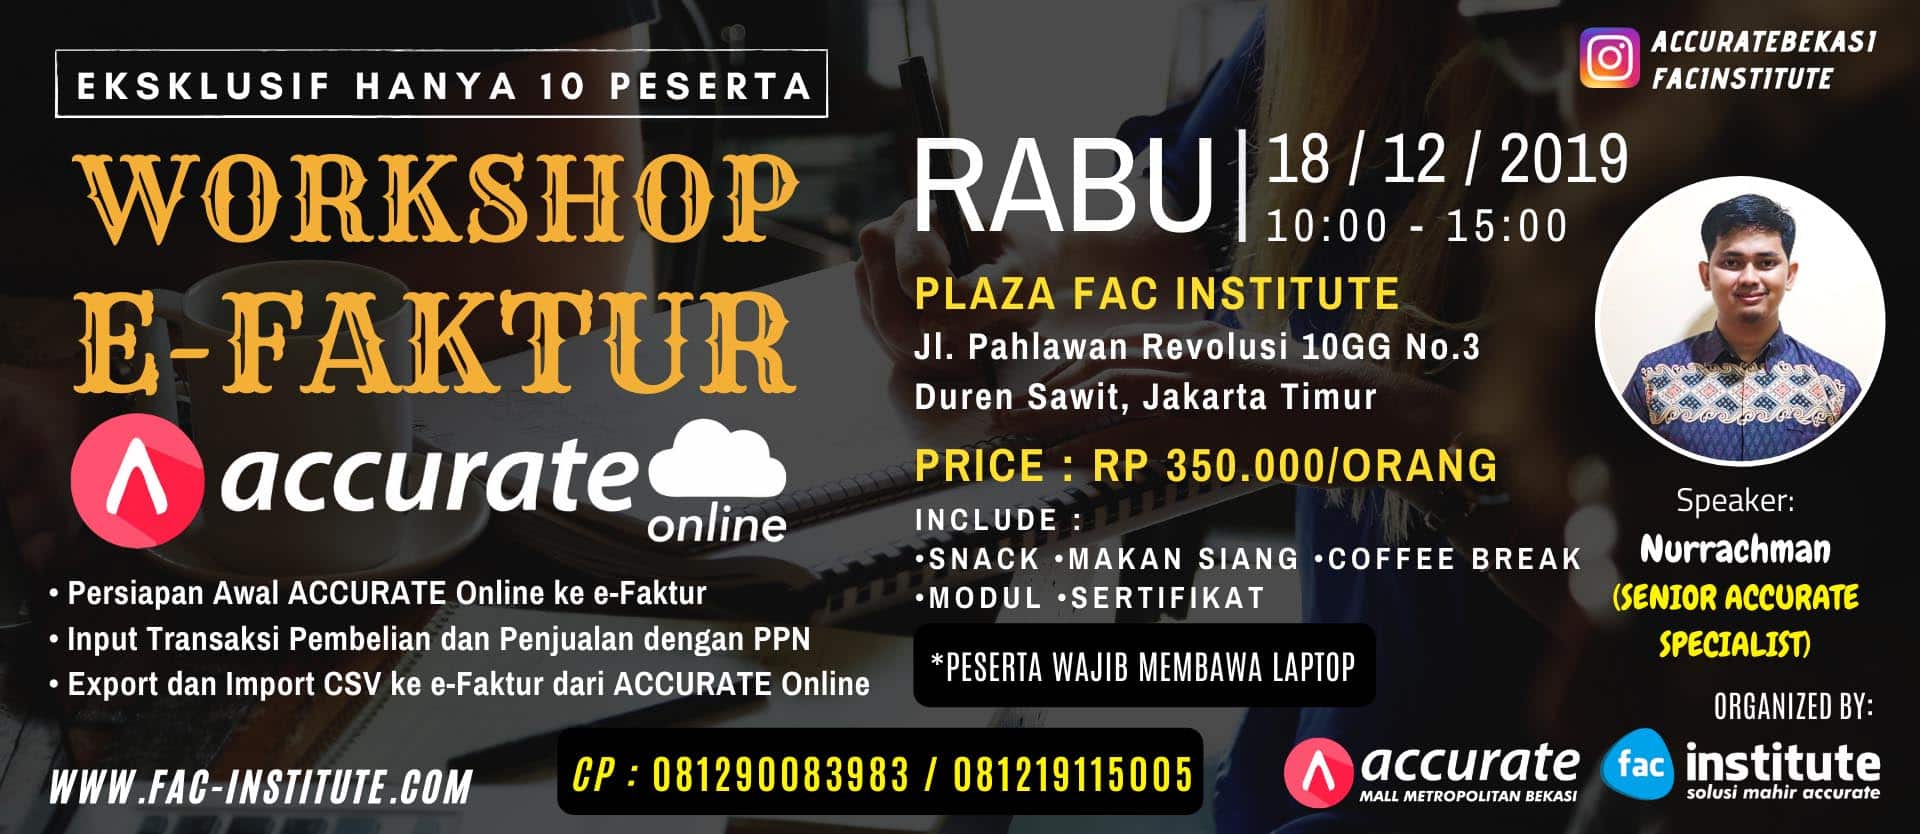 workshop fac abc accurate online